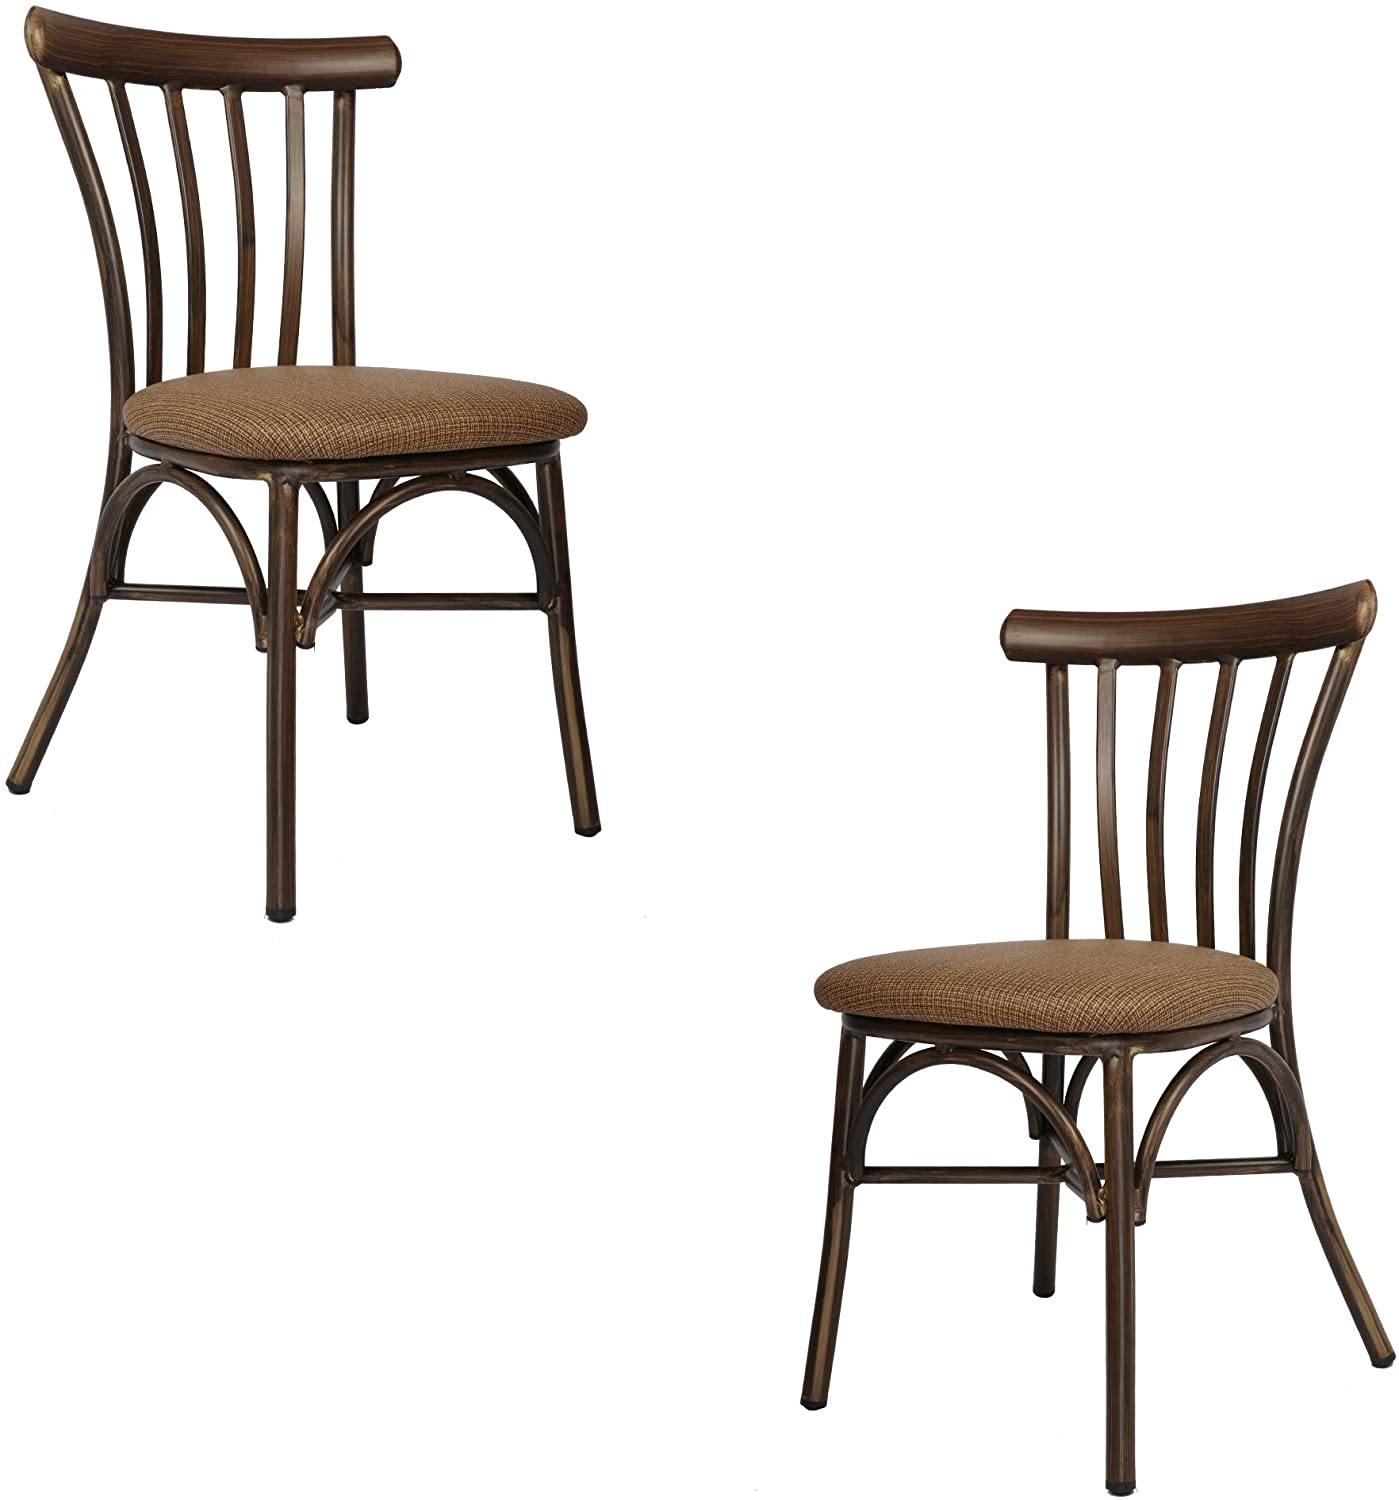 2 PCS Upholstered Dining Chairs Set, Aluminum Frame With Wood Finish, Modern PU Seat Style Suitable For Home And Restaurant Use, Coffee - Bosonshop